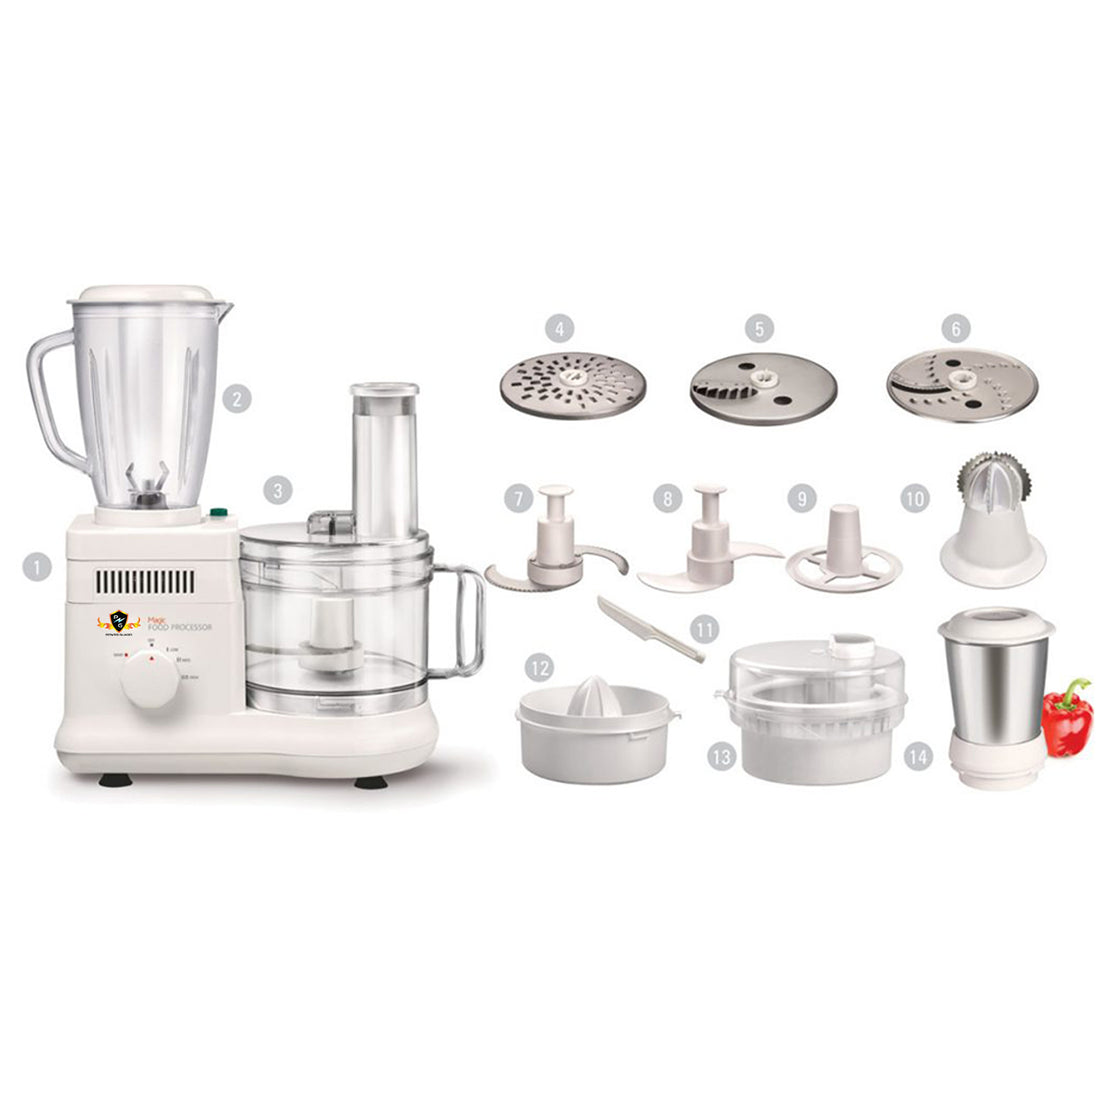 Top 5 Food Processors for Efficient Meal Prep